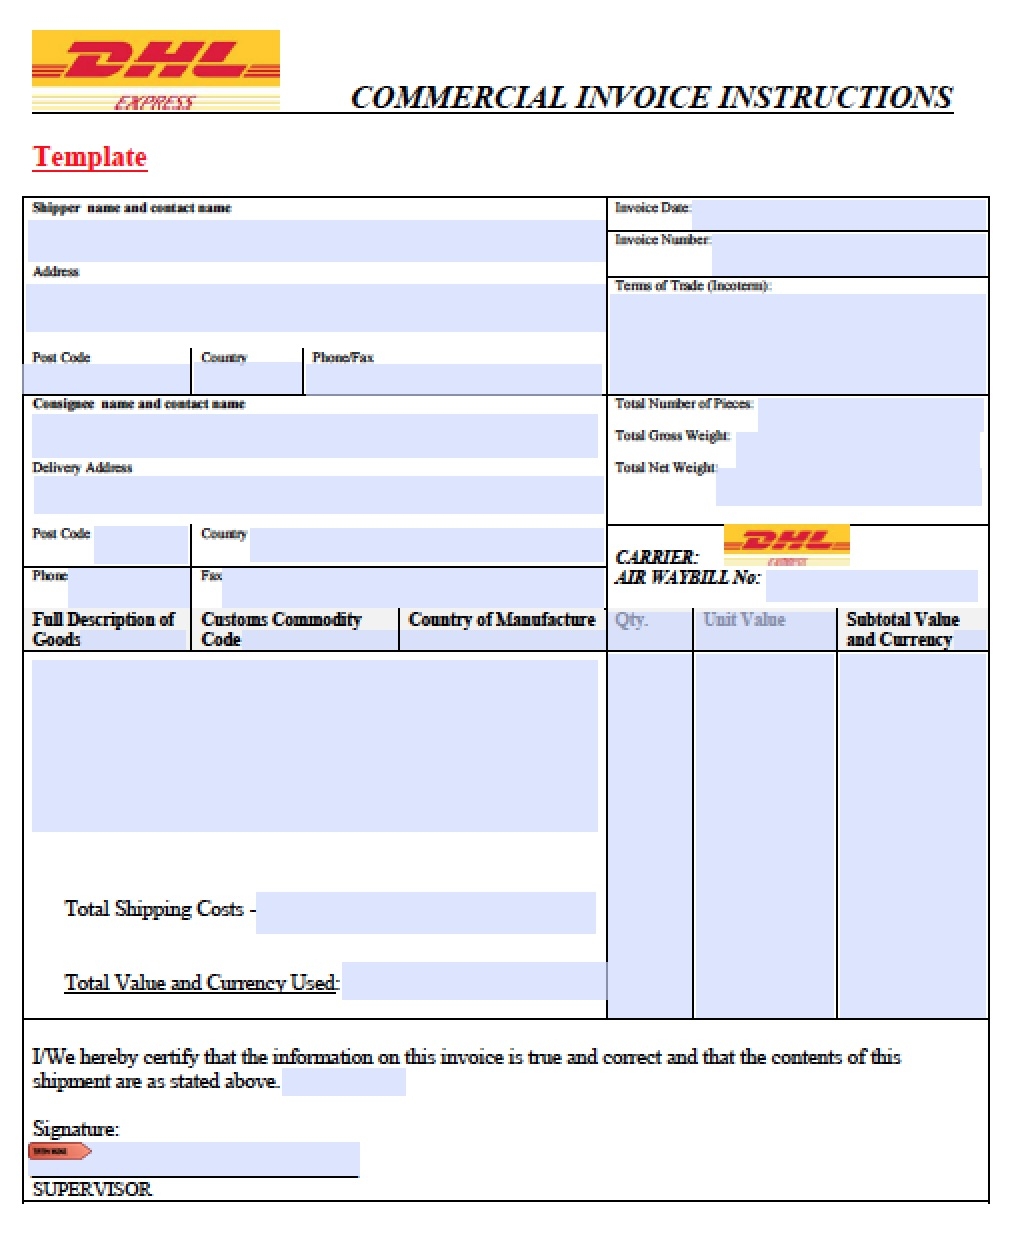 dhl commercial invoice template free dhl commercial invoice template excel pdf word doc 1022 X 1244